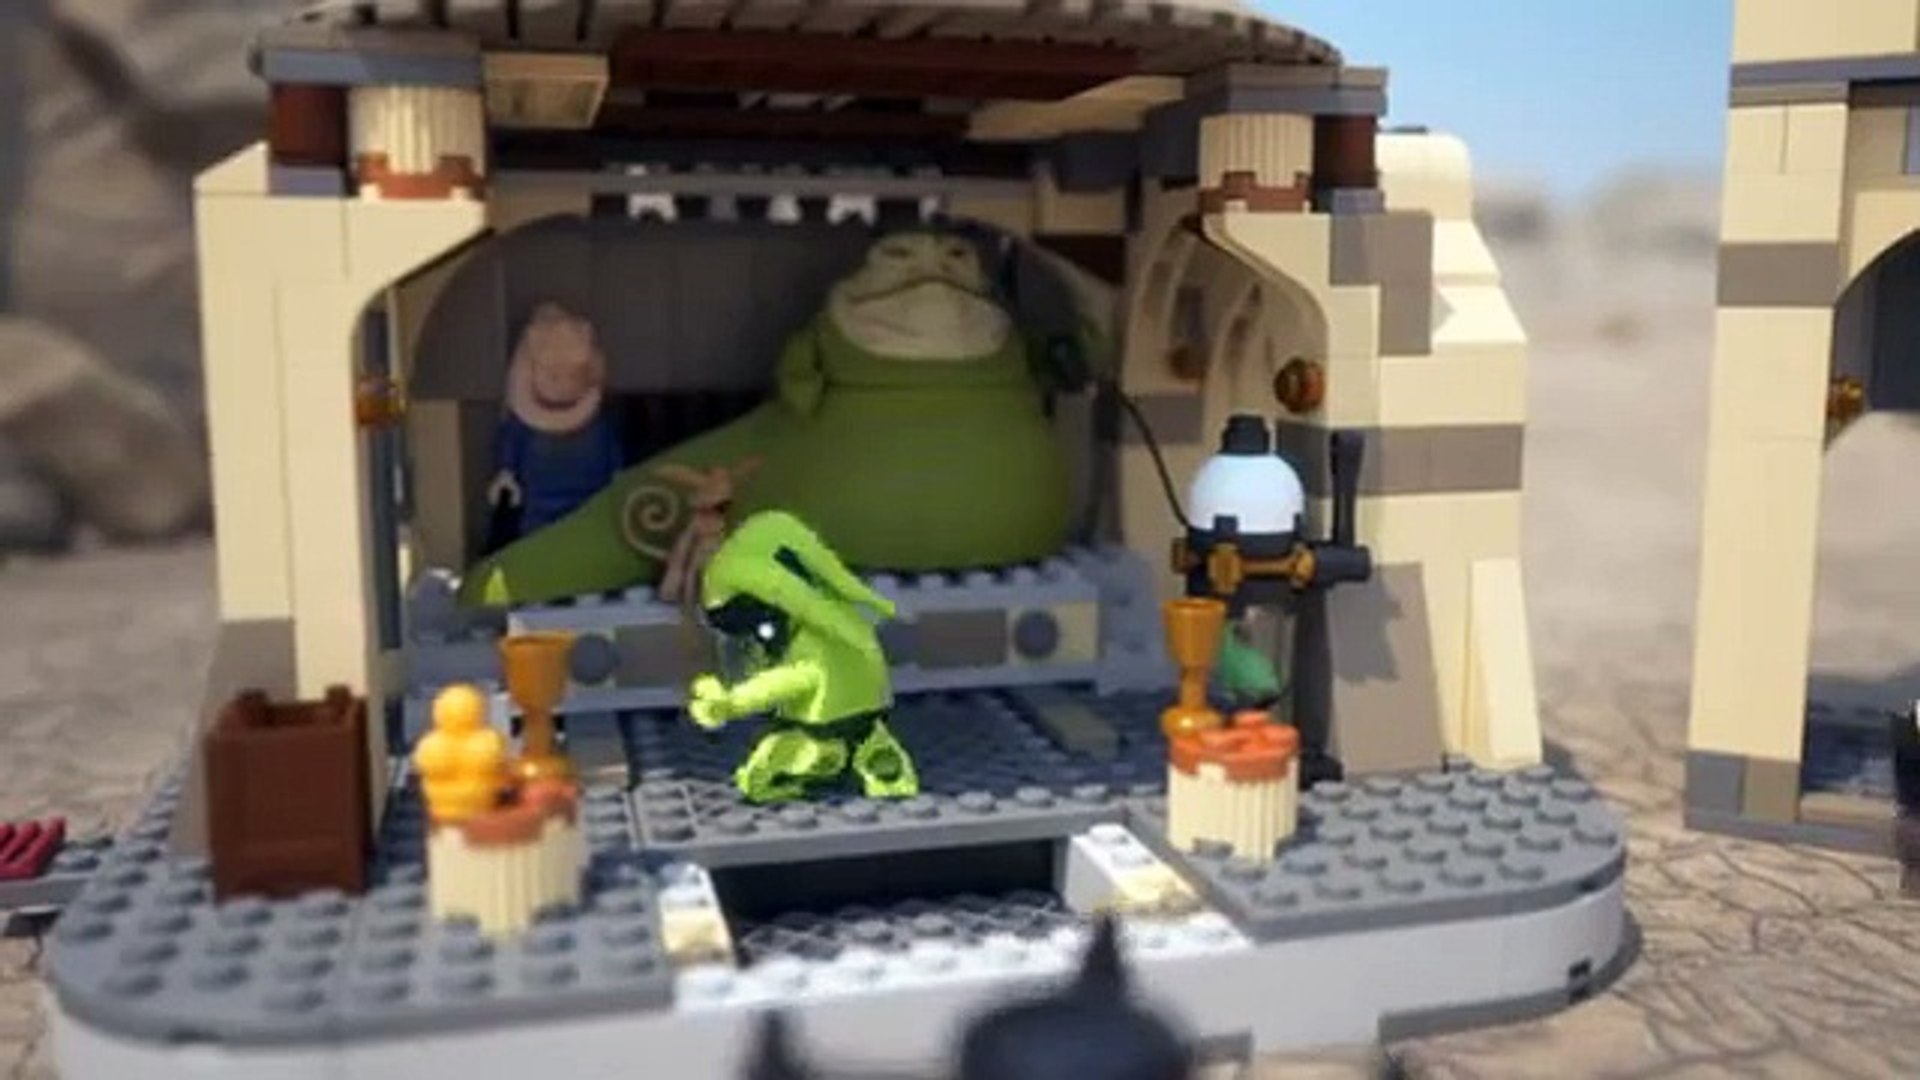 Lego Star Wars | 9516 | Jabbas Palace | Lego 3D Review - video Dailymotion